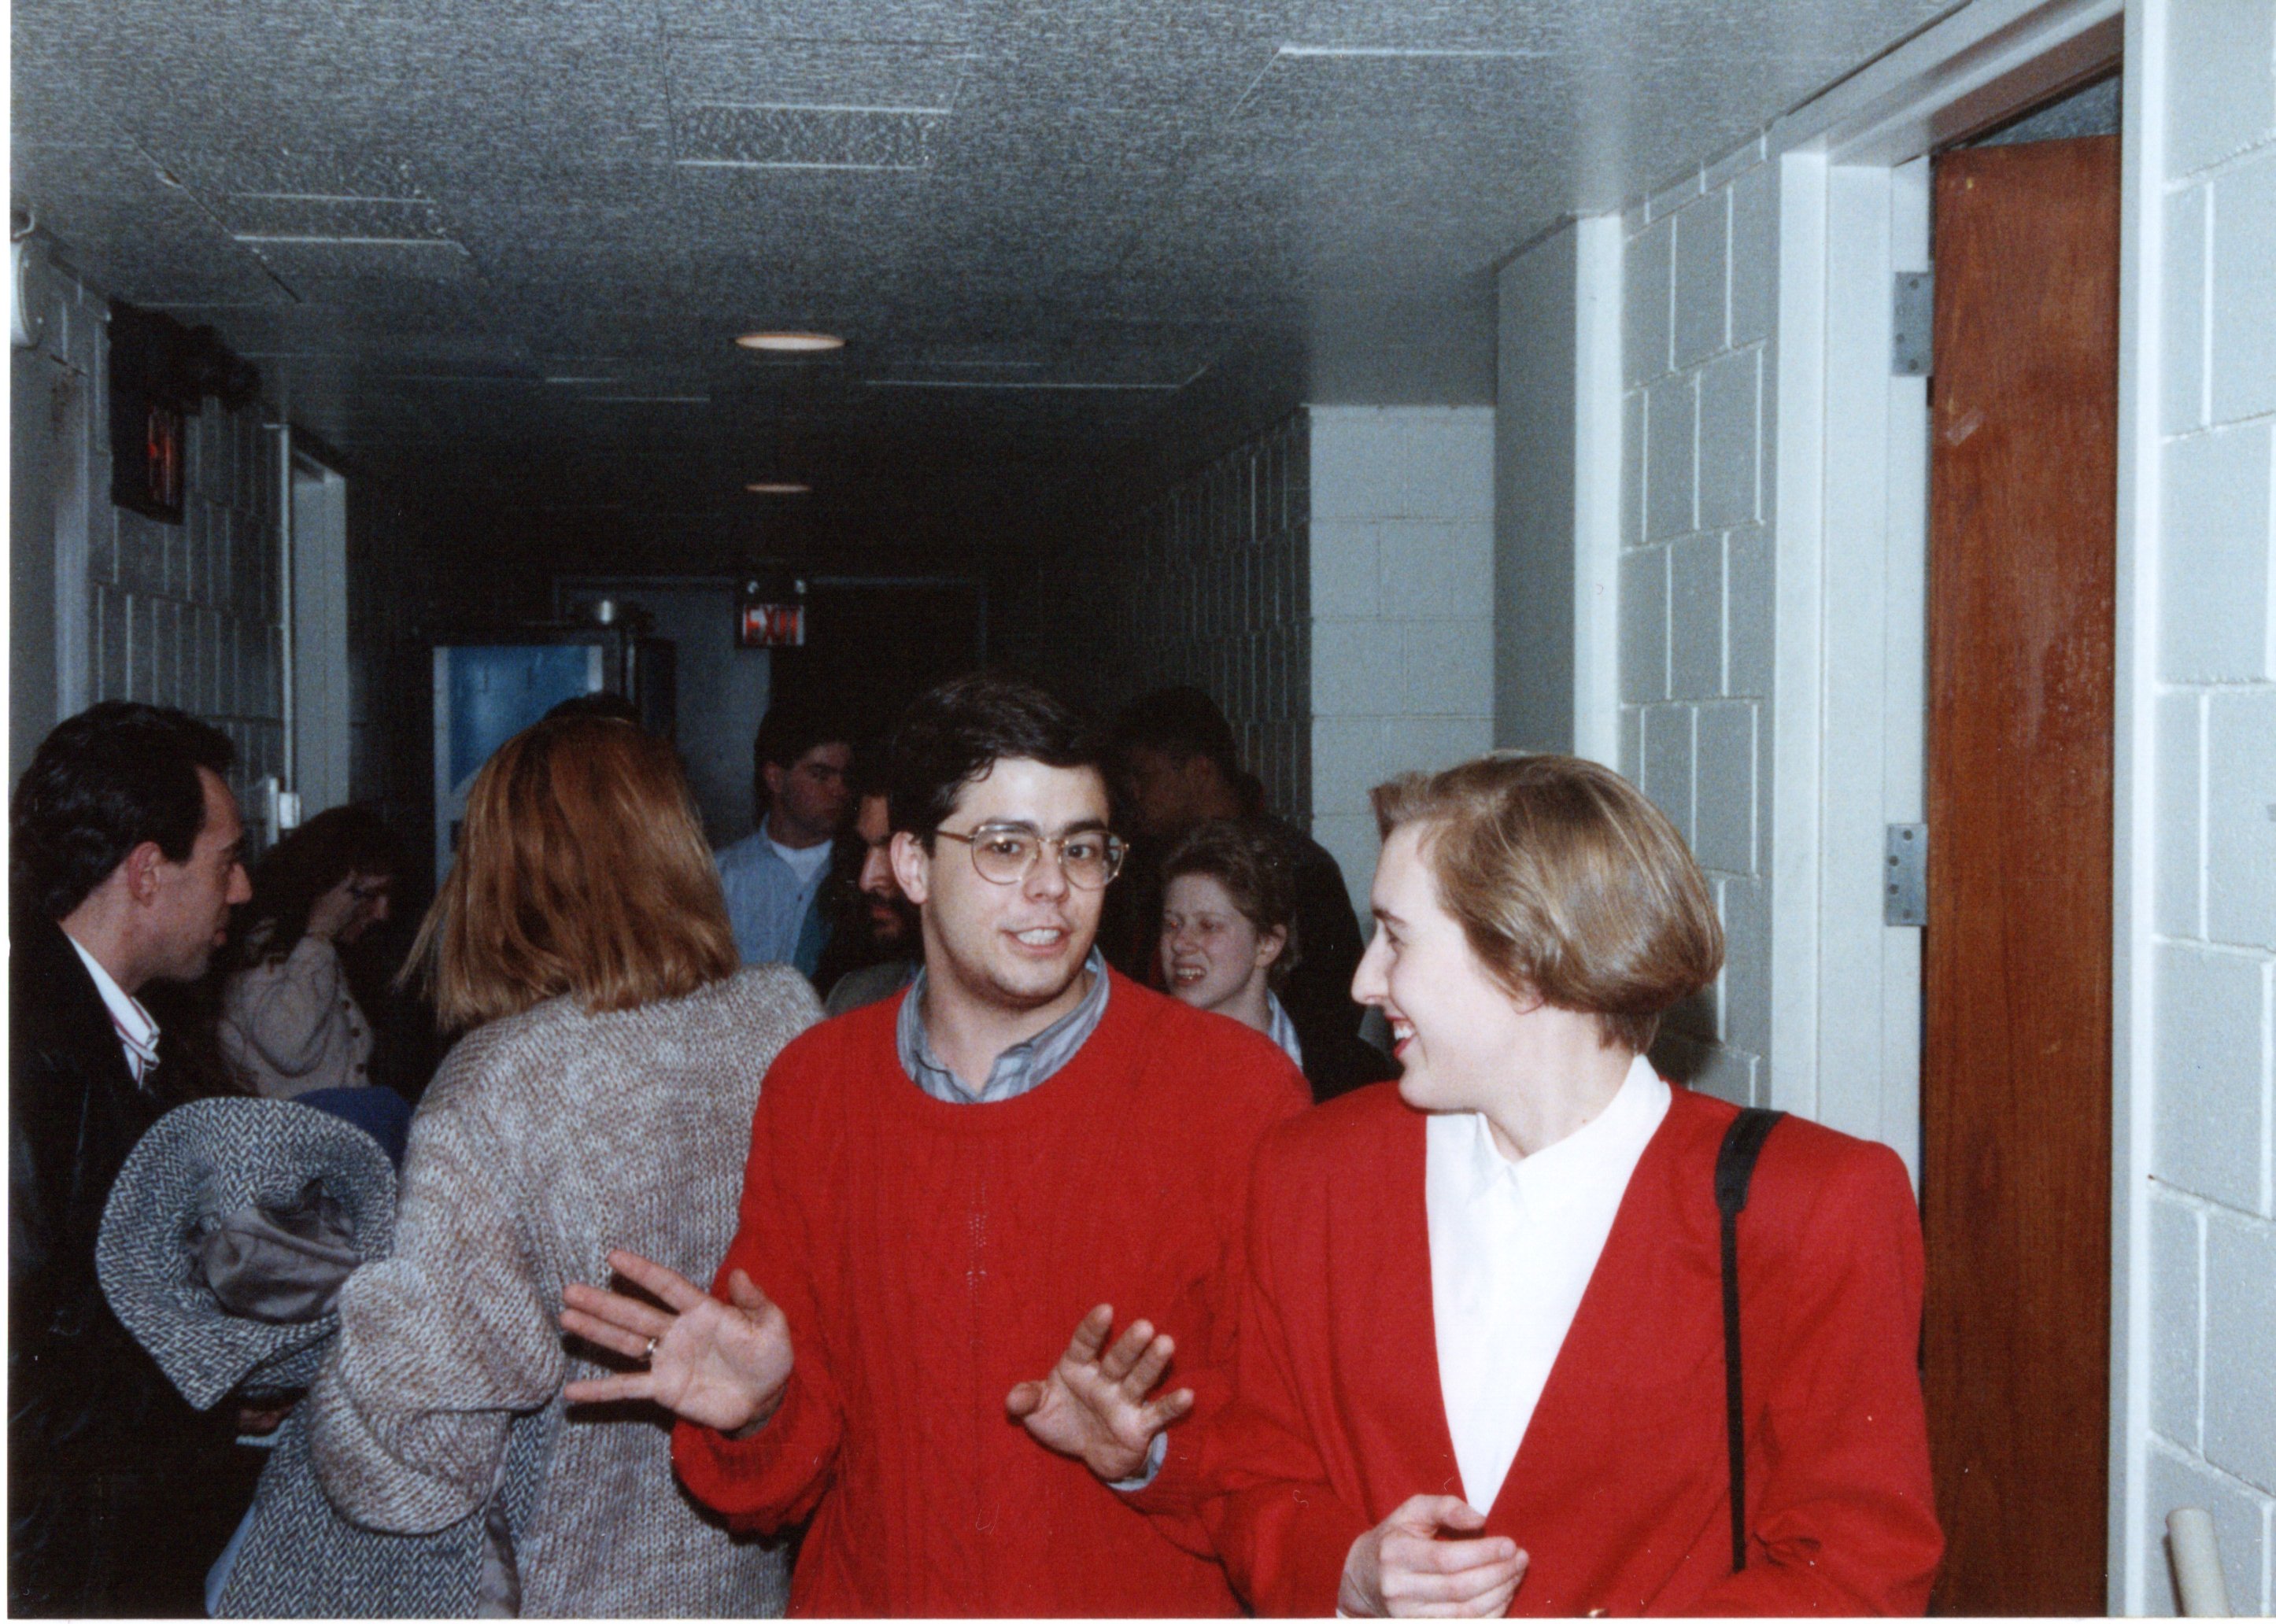 After the Call in the Hallway outside WRSU - 1992